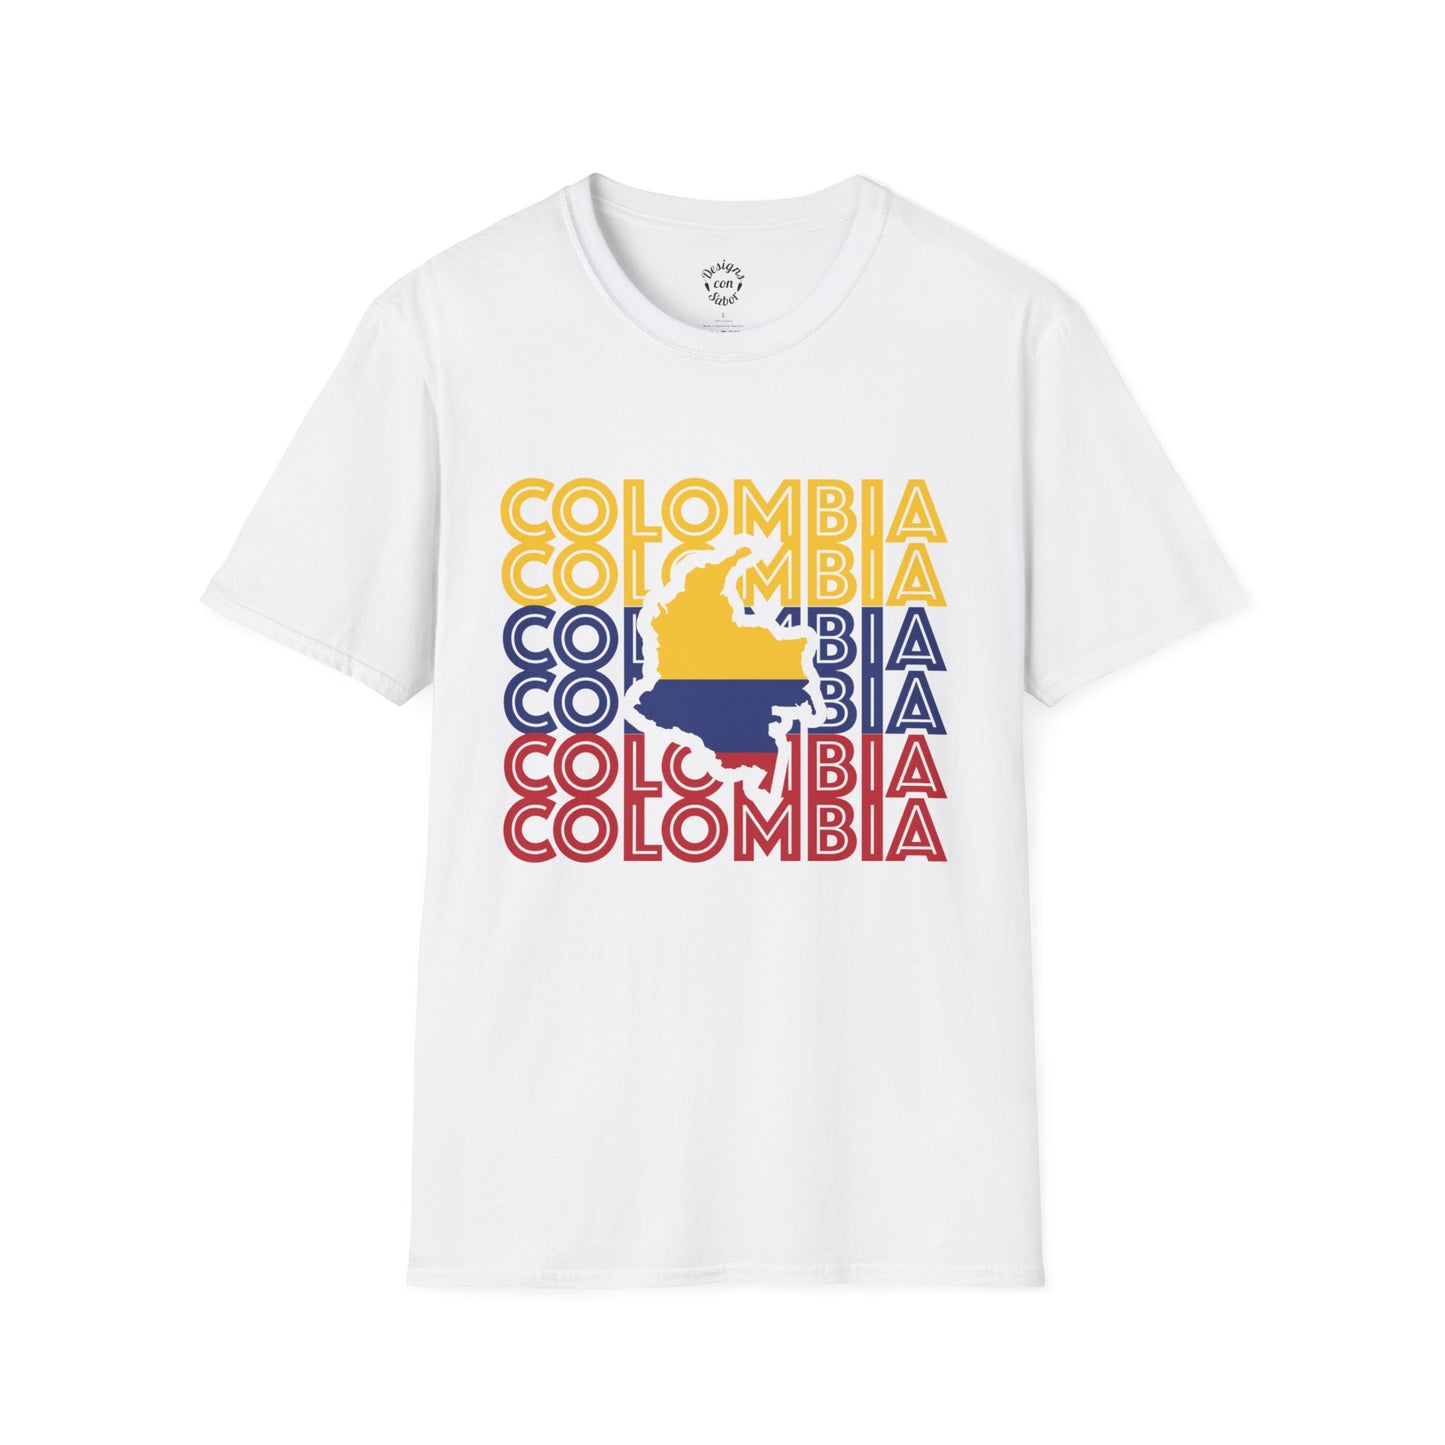 Colombia With Country Outline